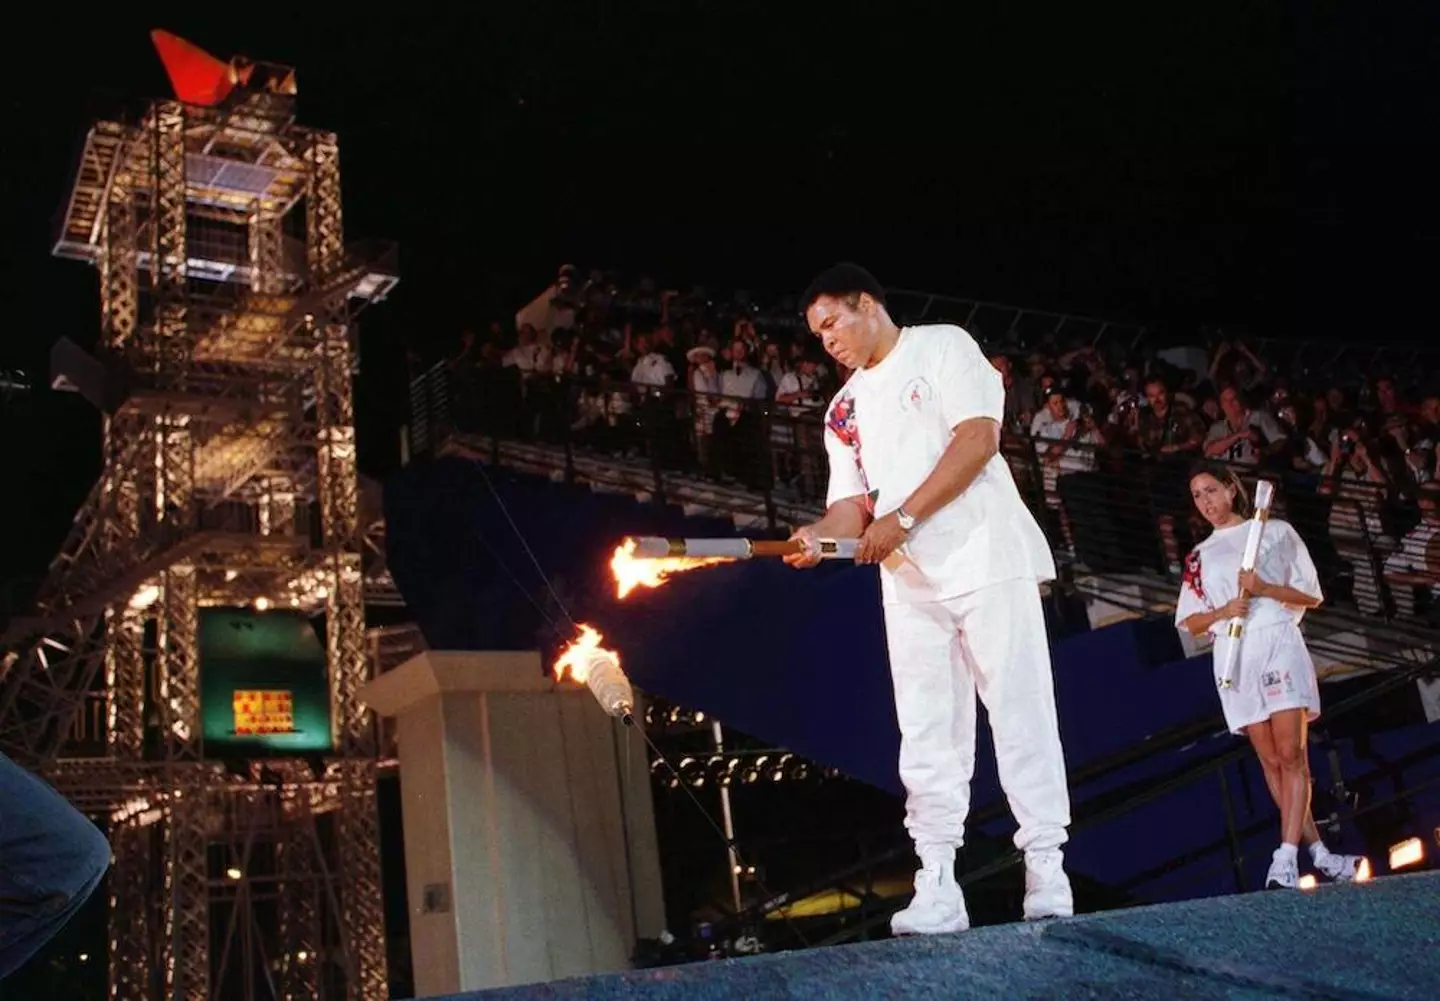 Muhammad Ali lighting the Olympic torch in 1996 is currently the most viewed TV event.